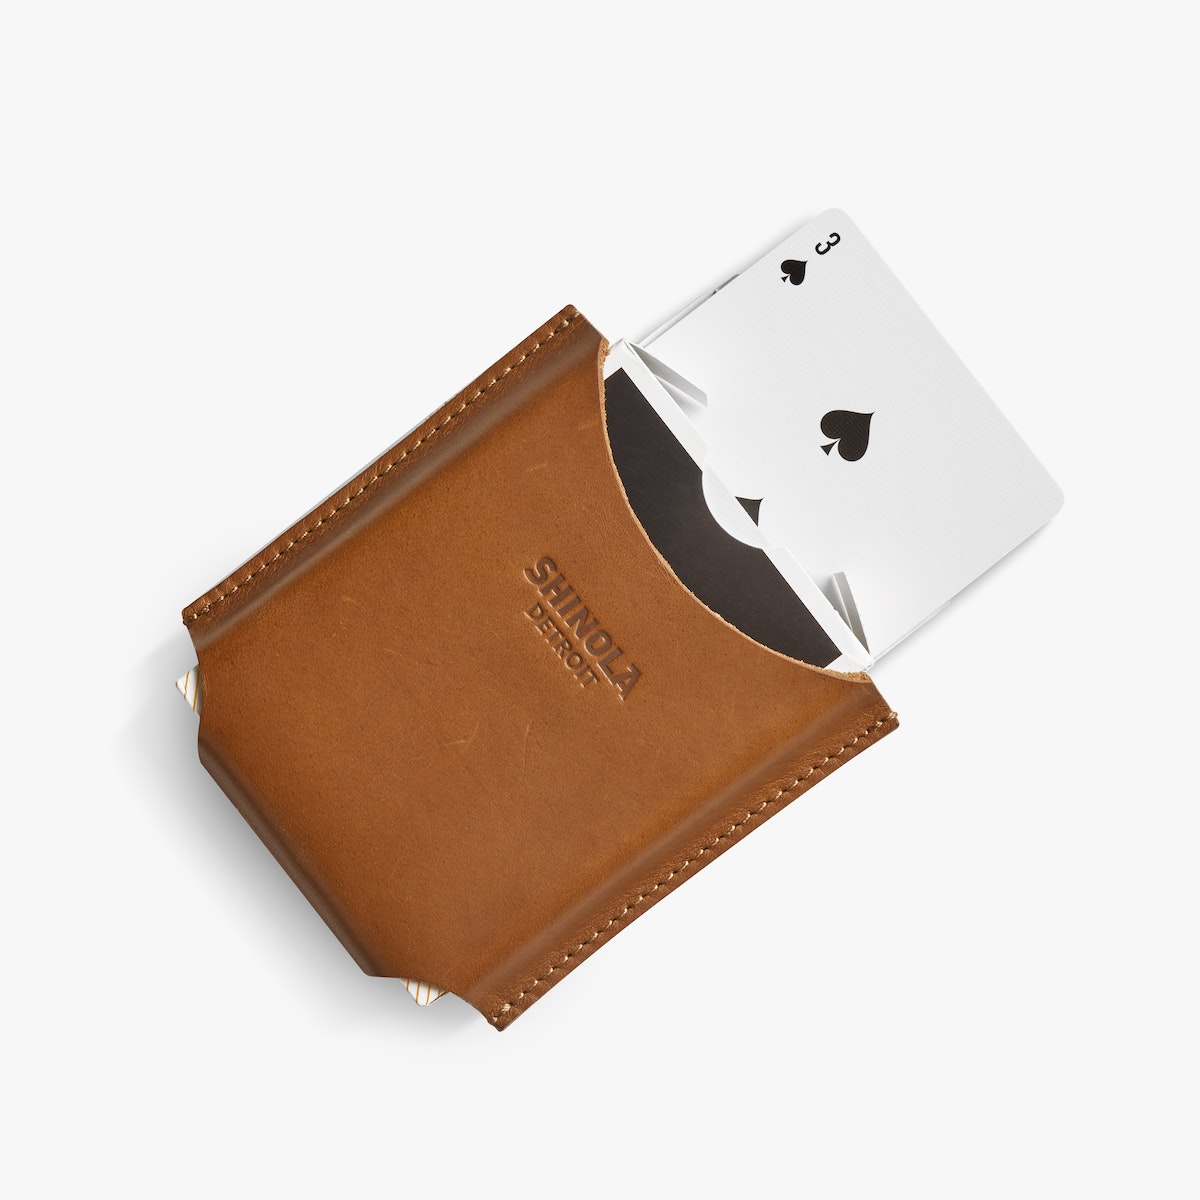 PLAYING CARDS IN LEATHER SLEEVE